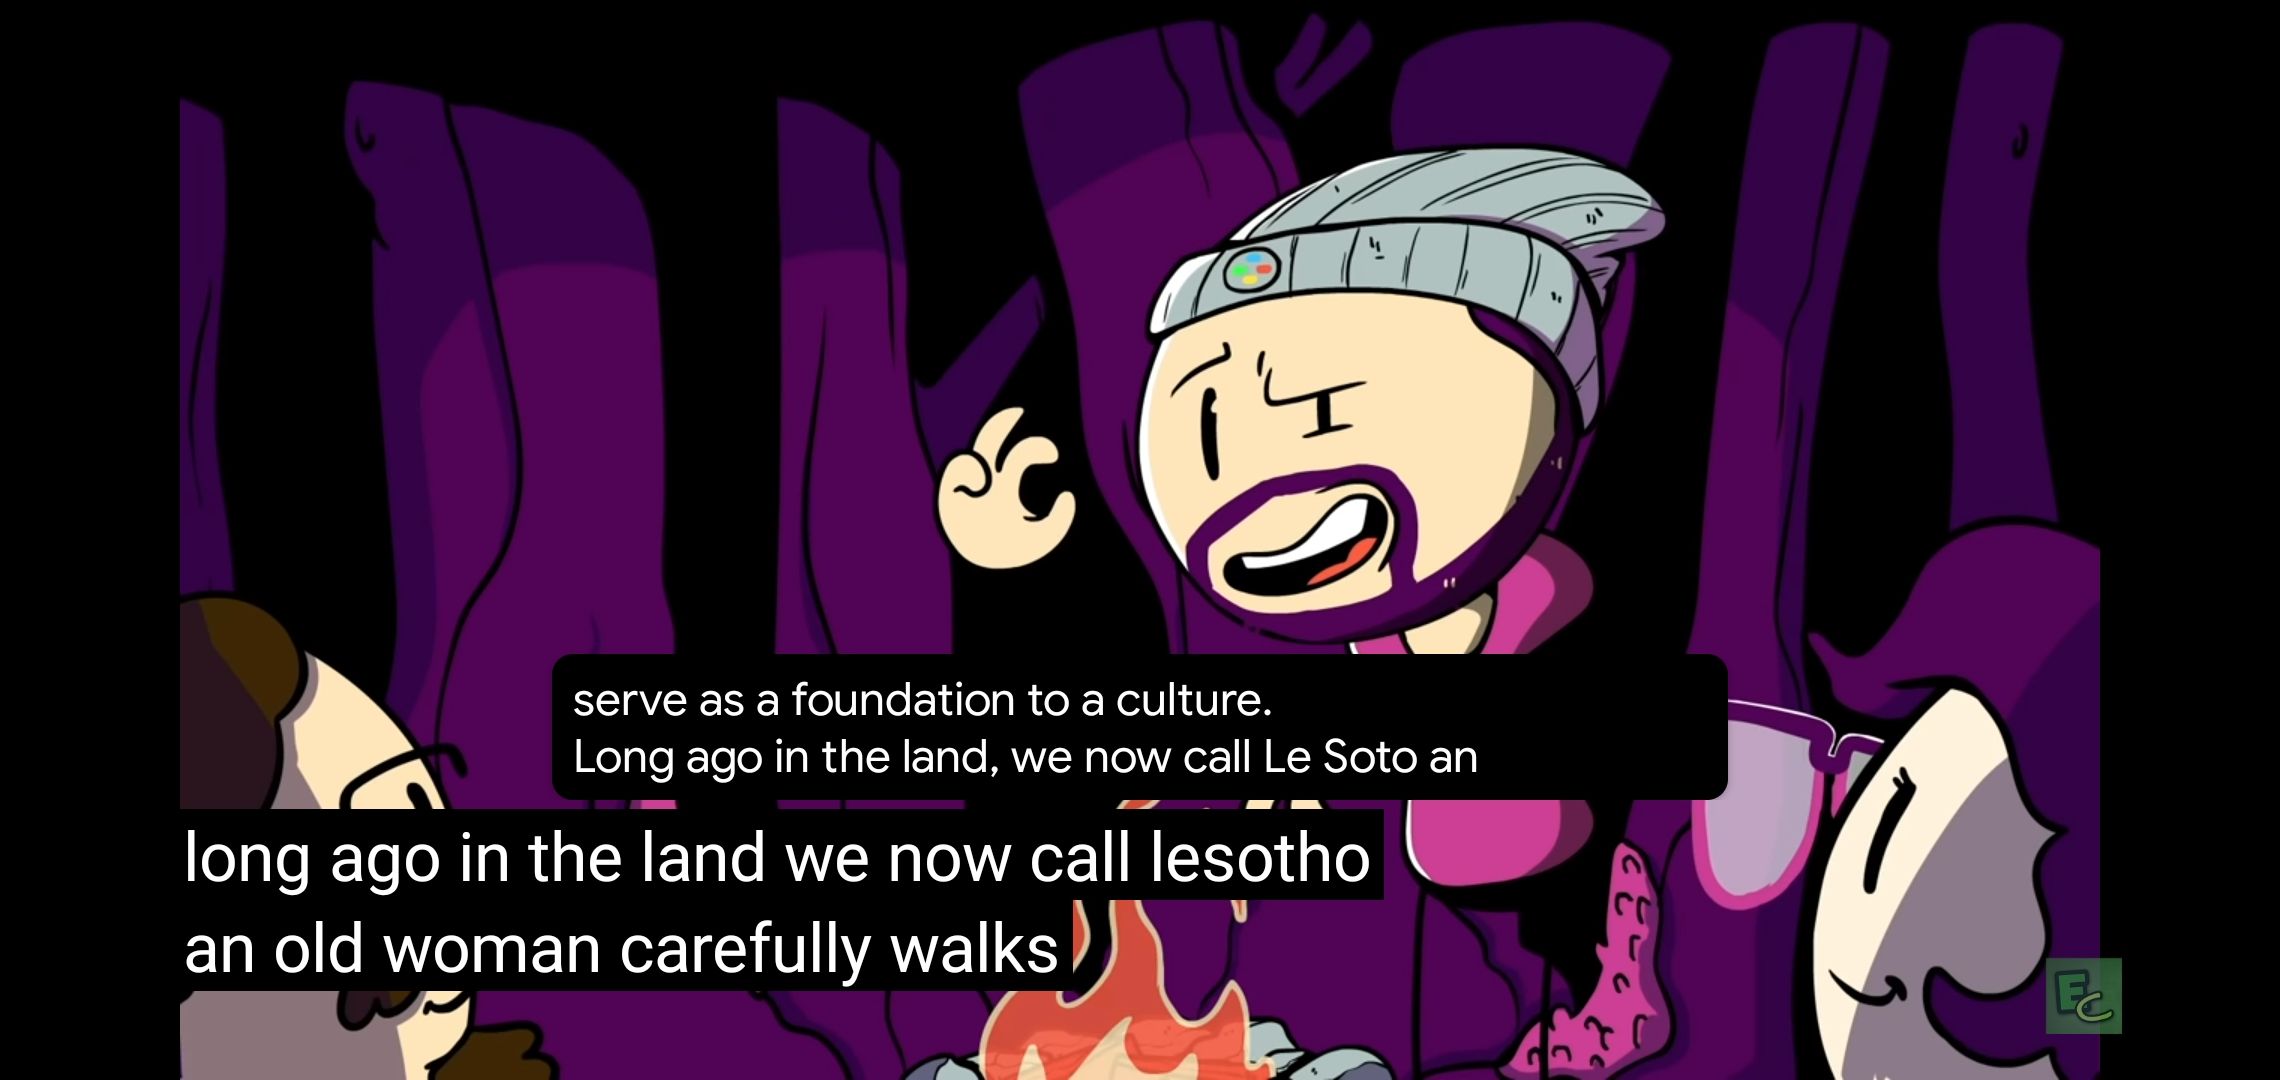 live caption sometimes corrects a spelling error that YouTube's automatic captions miss. An example is shown where Le Soto is captured correctly in live caption, but spelled "lesotho" in YouTube's captions.